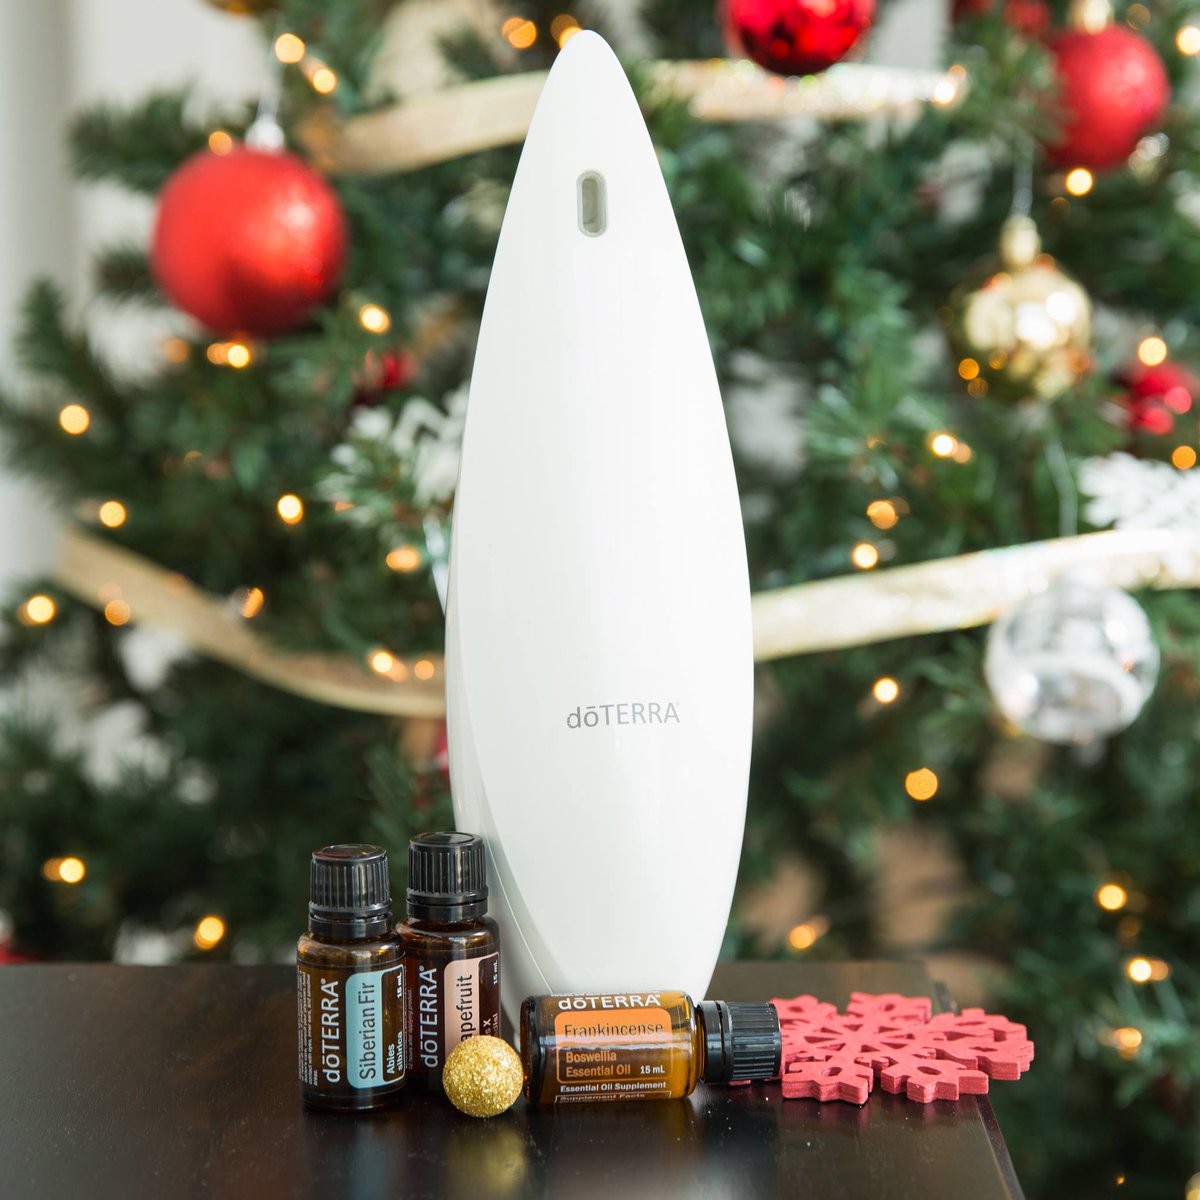 Looking for a refreshing and uplifting holiday diffuser blend? Try this Happy Holidays blend! 
Combine these oils:
2 drops Siberian Fir 
2 drops Grapefruit 
1 drop Frankincense
#eosoulelements #doterra #essentialoils #frankincense #siberianfir